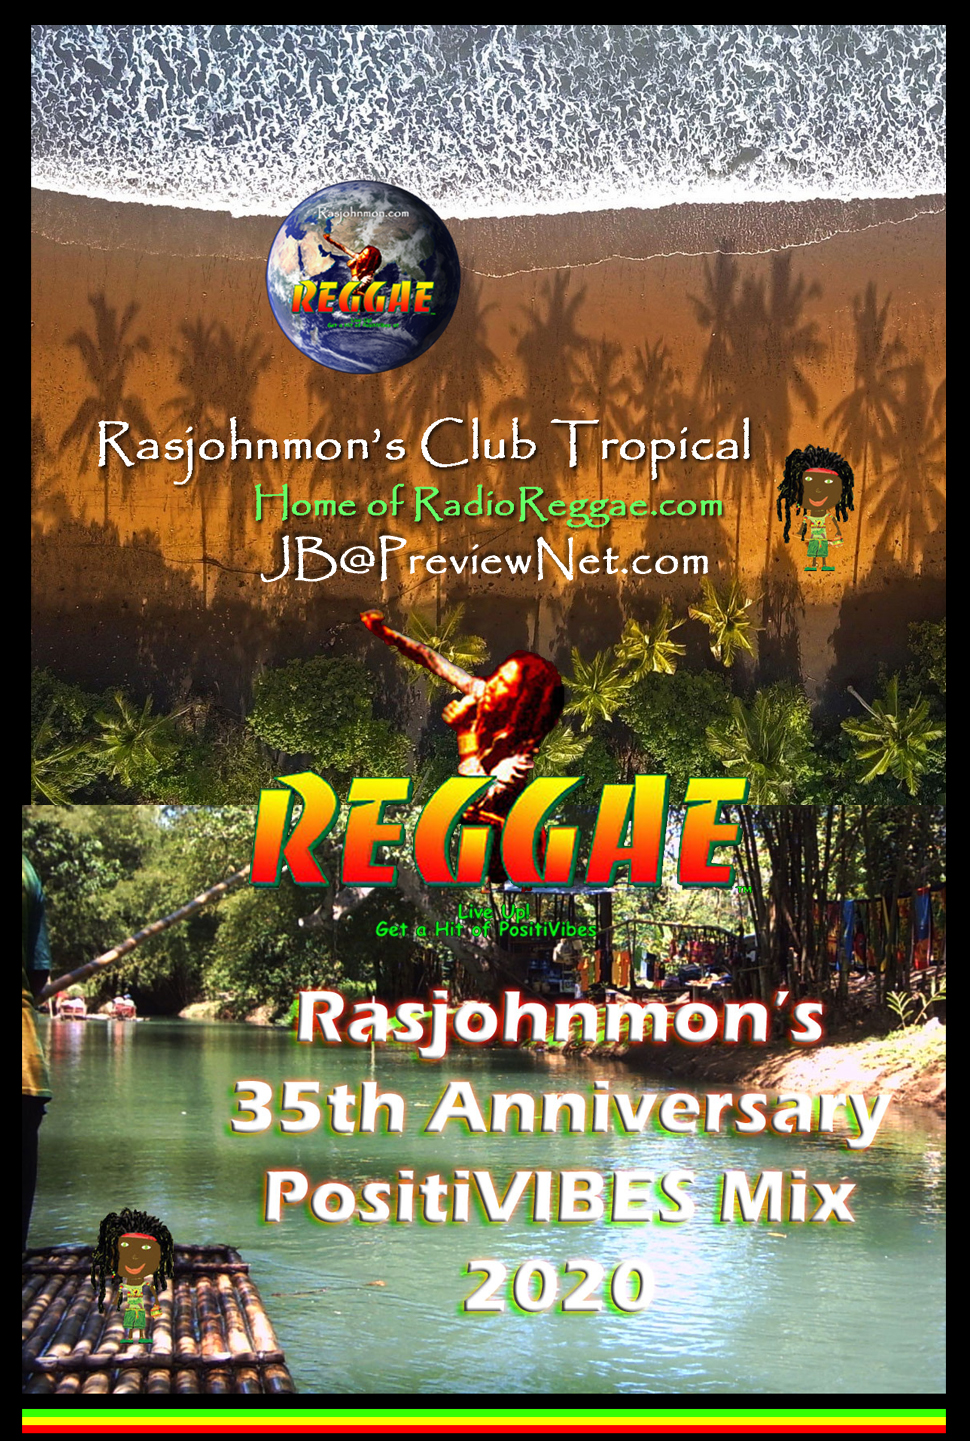 Welcome to Rasjohnmon's 35th Anniversary PositiVibes Collection sponsored by The Club Tropical and RadioReggae